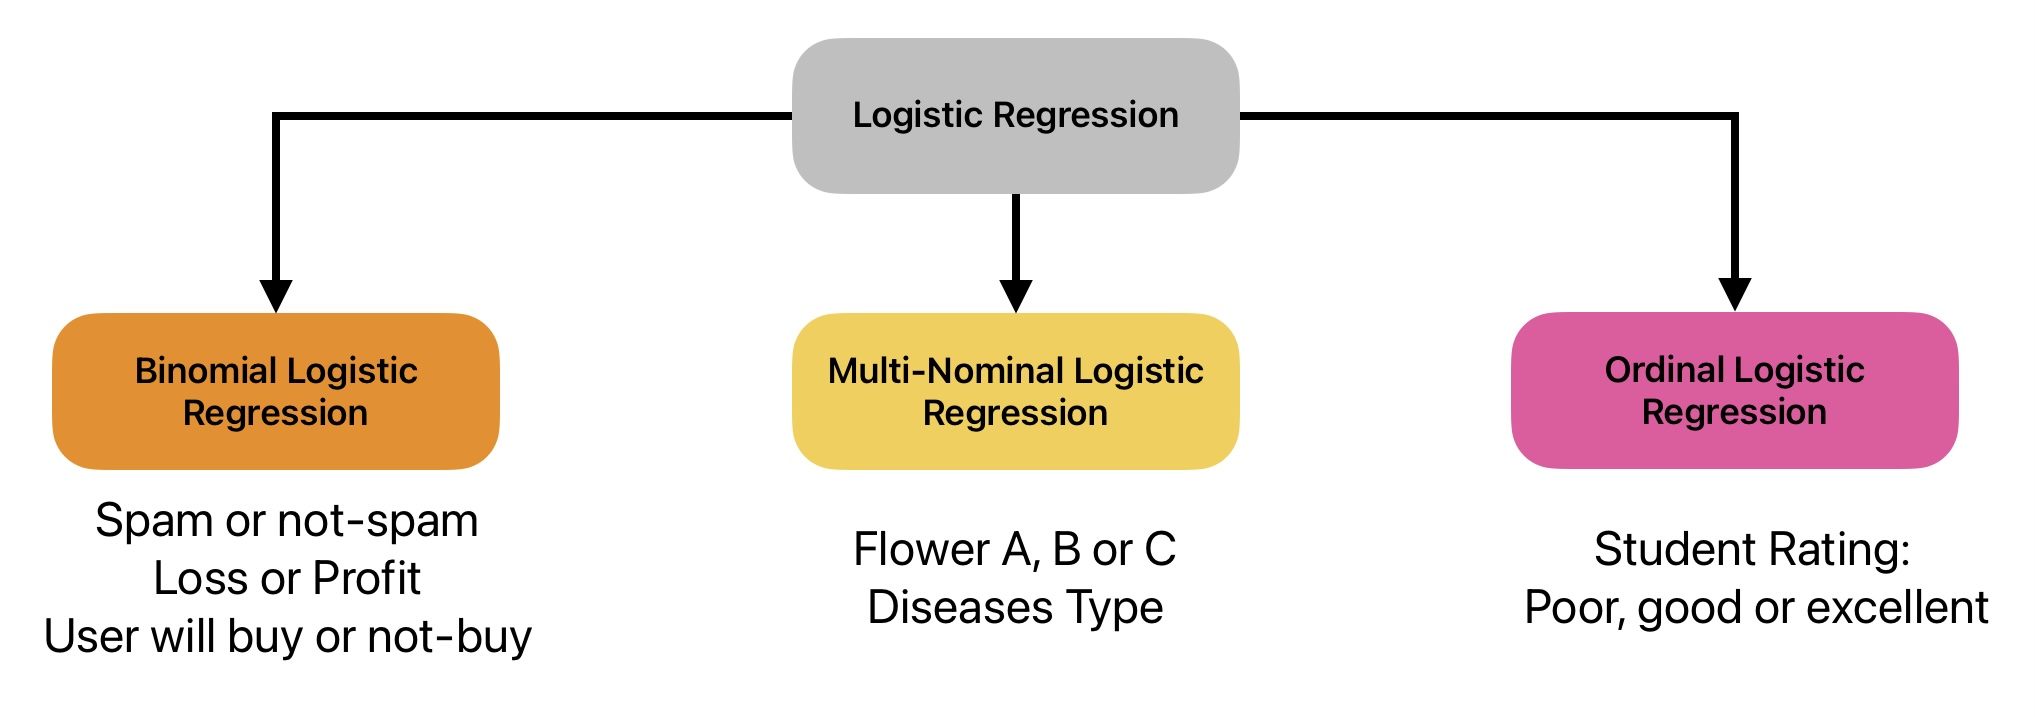 This image shows various types of logistic regression algorithms.